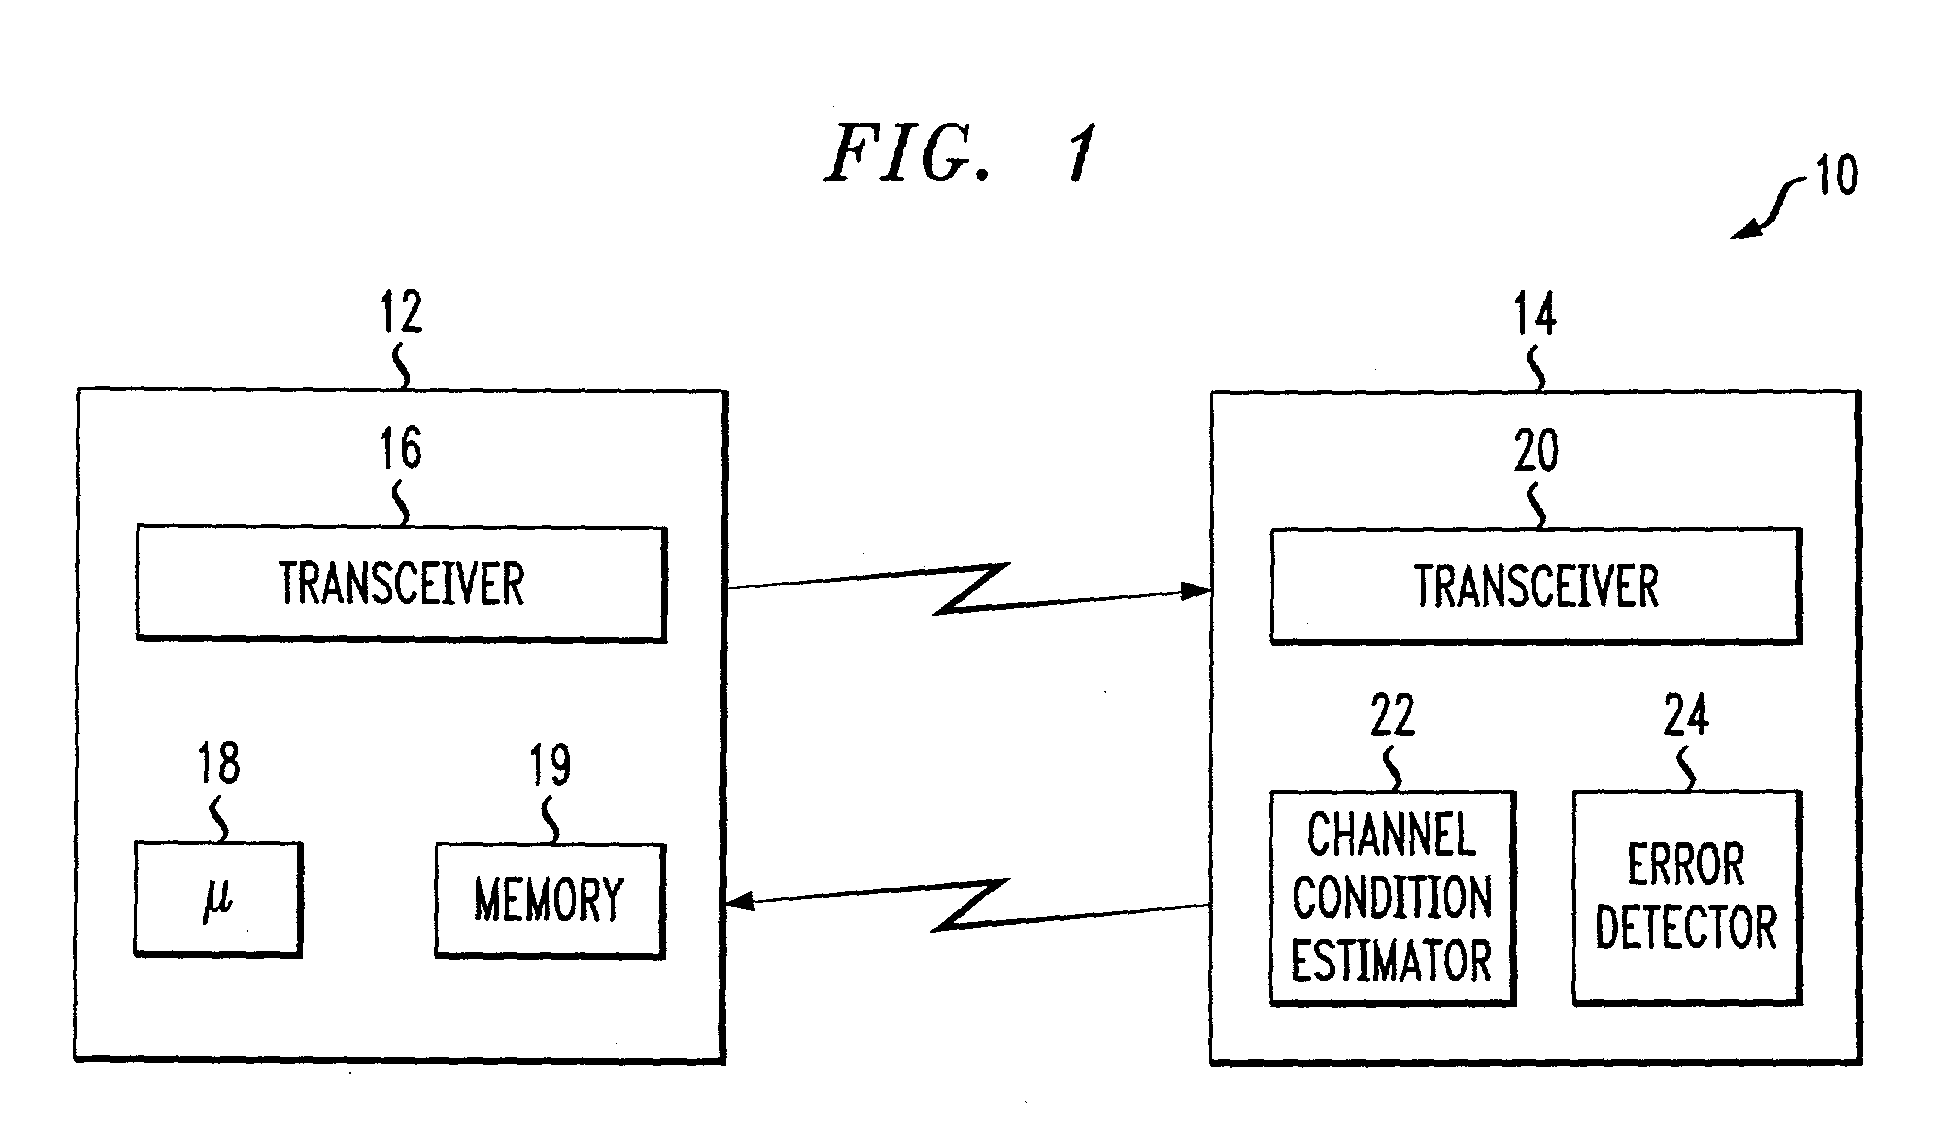 Adapative quality control loop for link rate adaptation in data packet communications